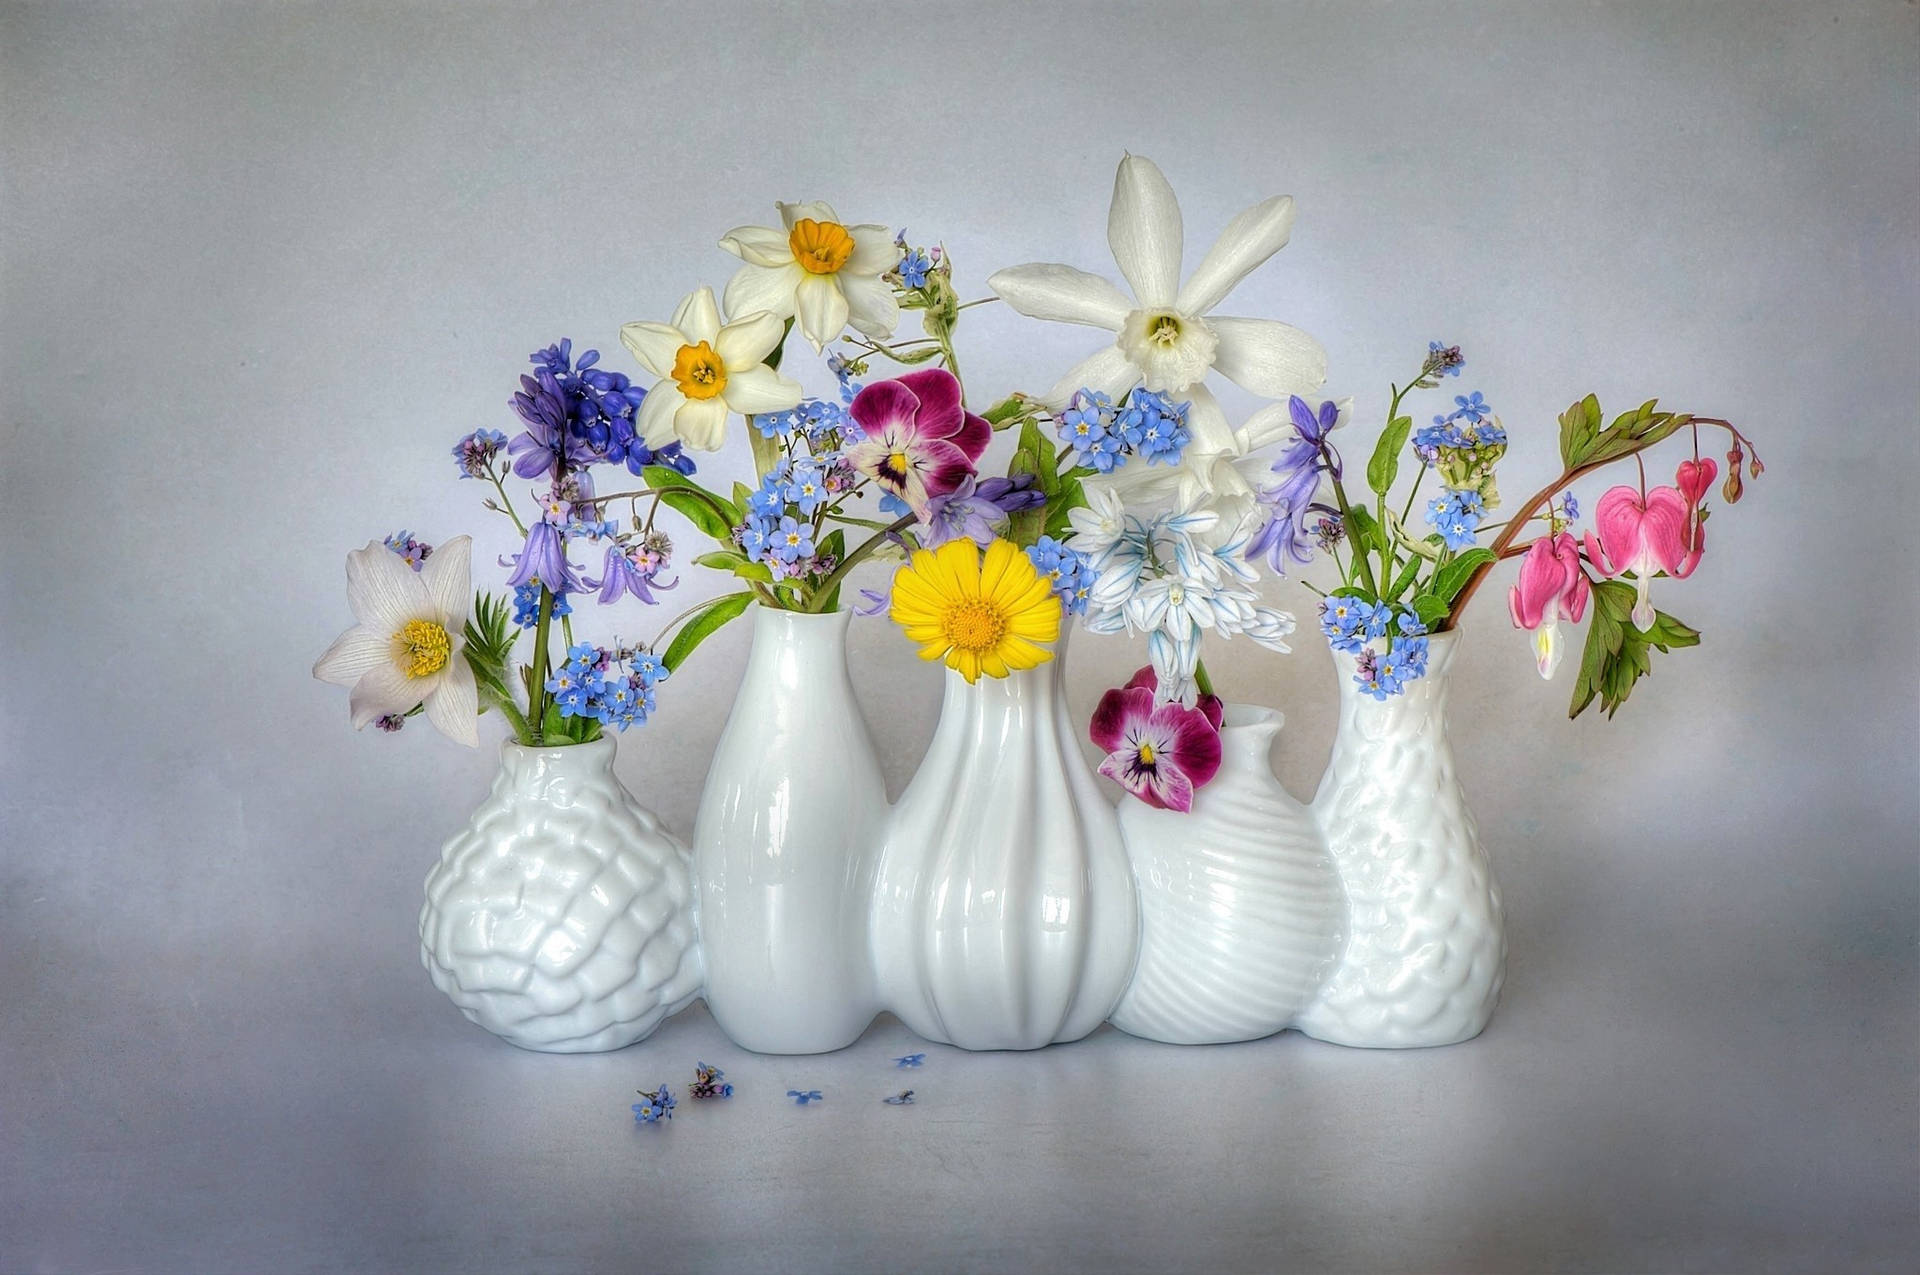 Five Flower Vase With Flowers Wallpaper